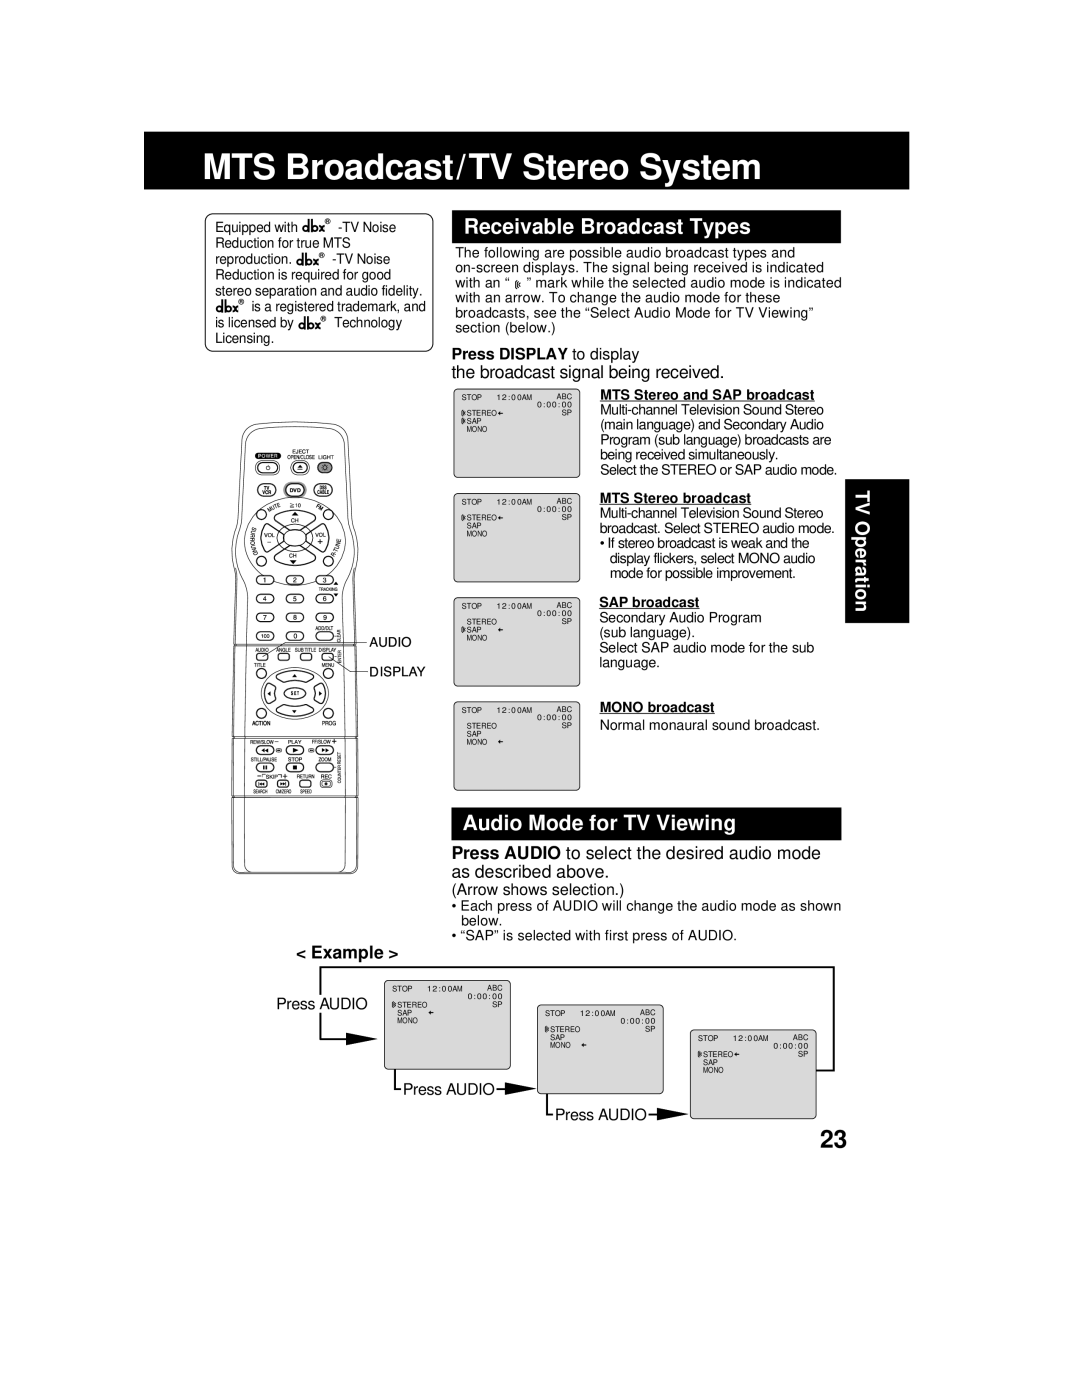 Panasonic AG 527DVDE MTS Broadcast/TV Stereo System, Receivable Broadcast Types, Audio Mode for TV Viewing, TV Operation 